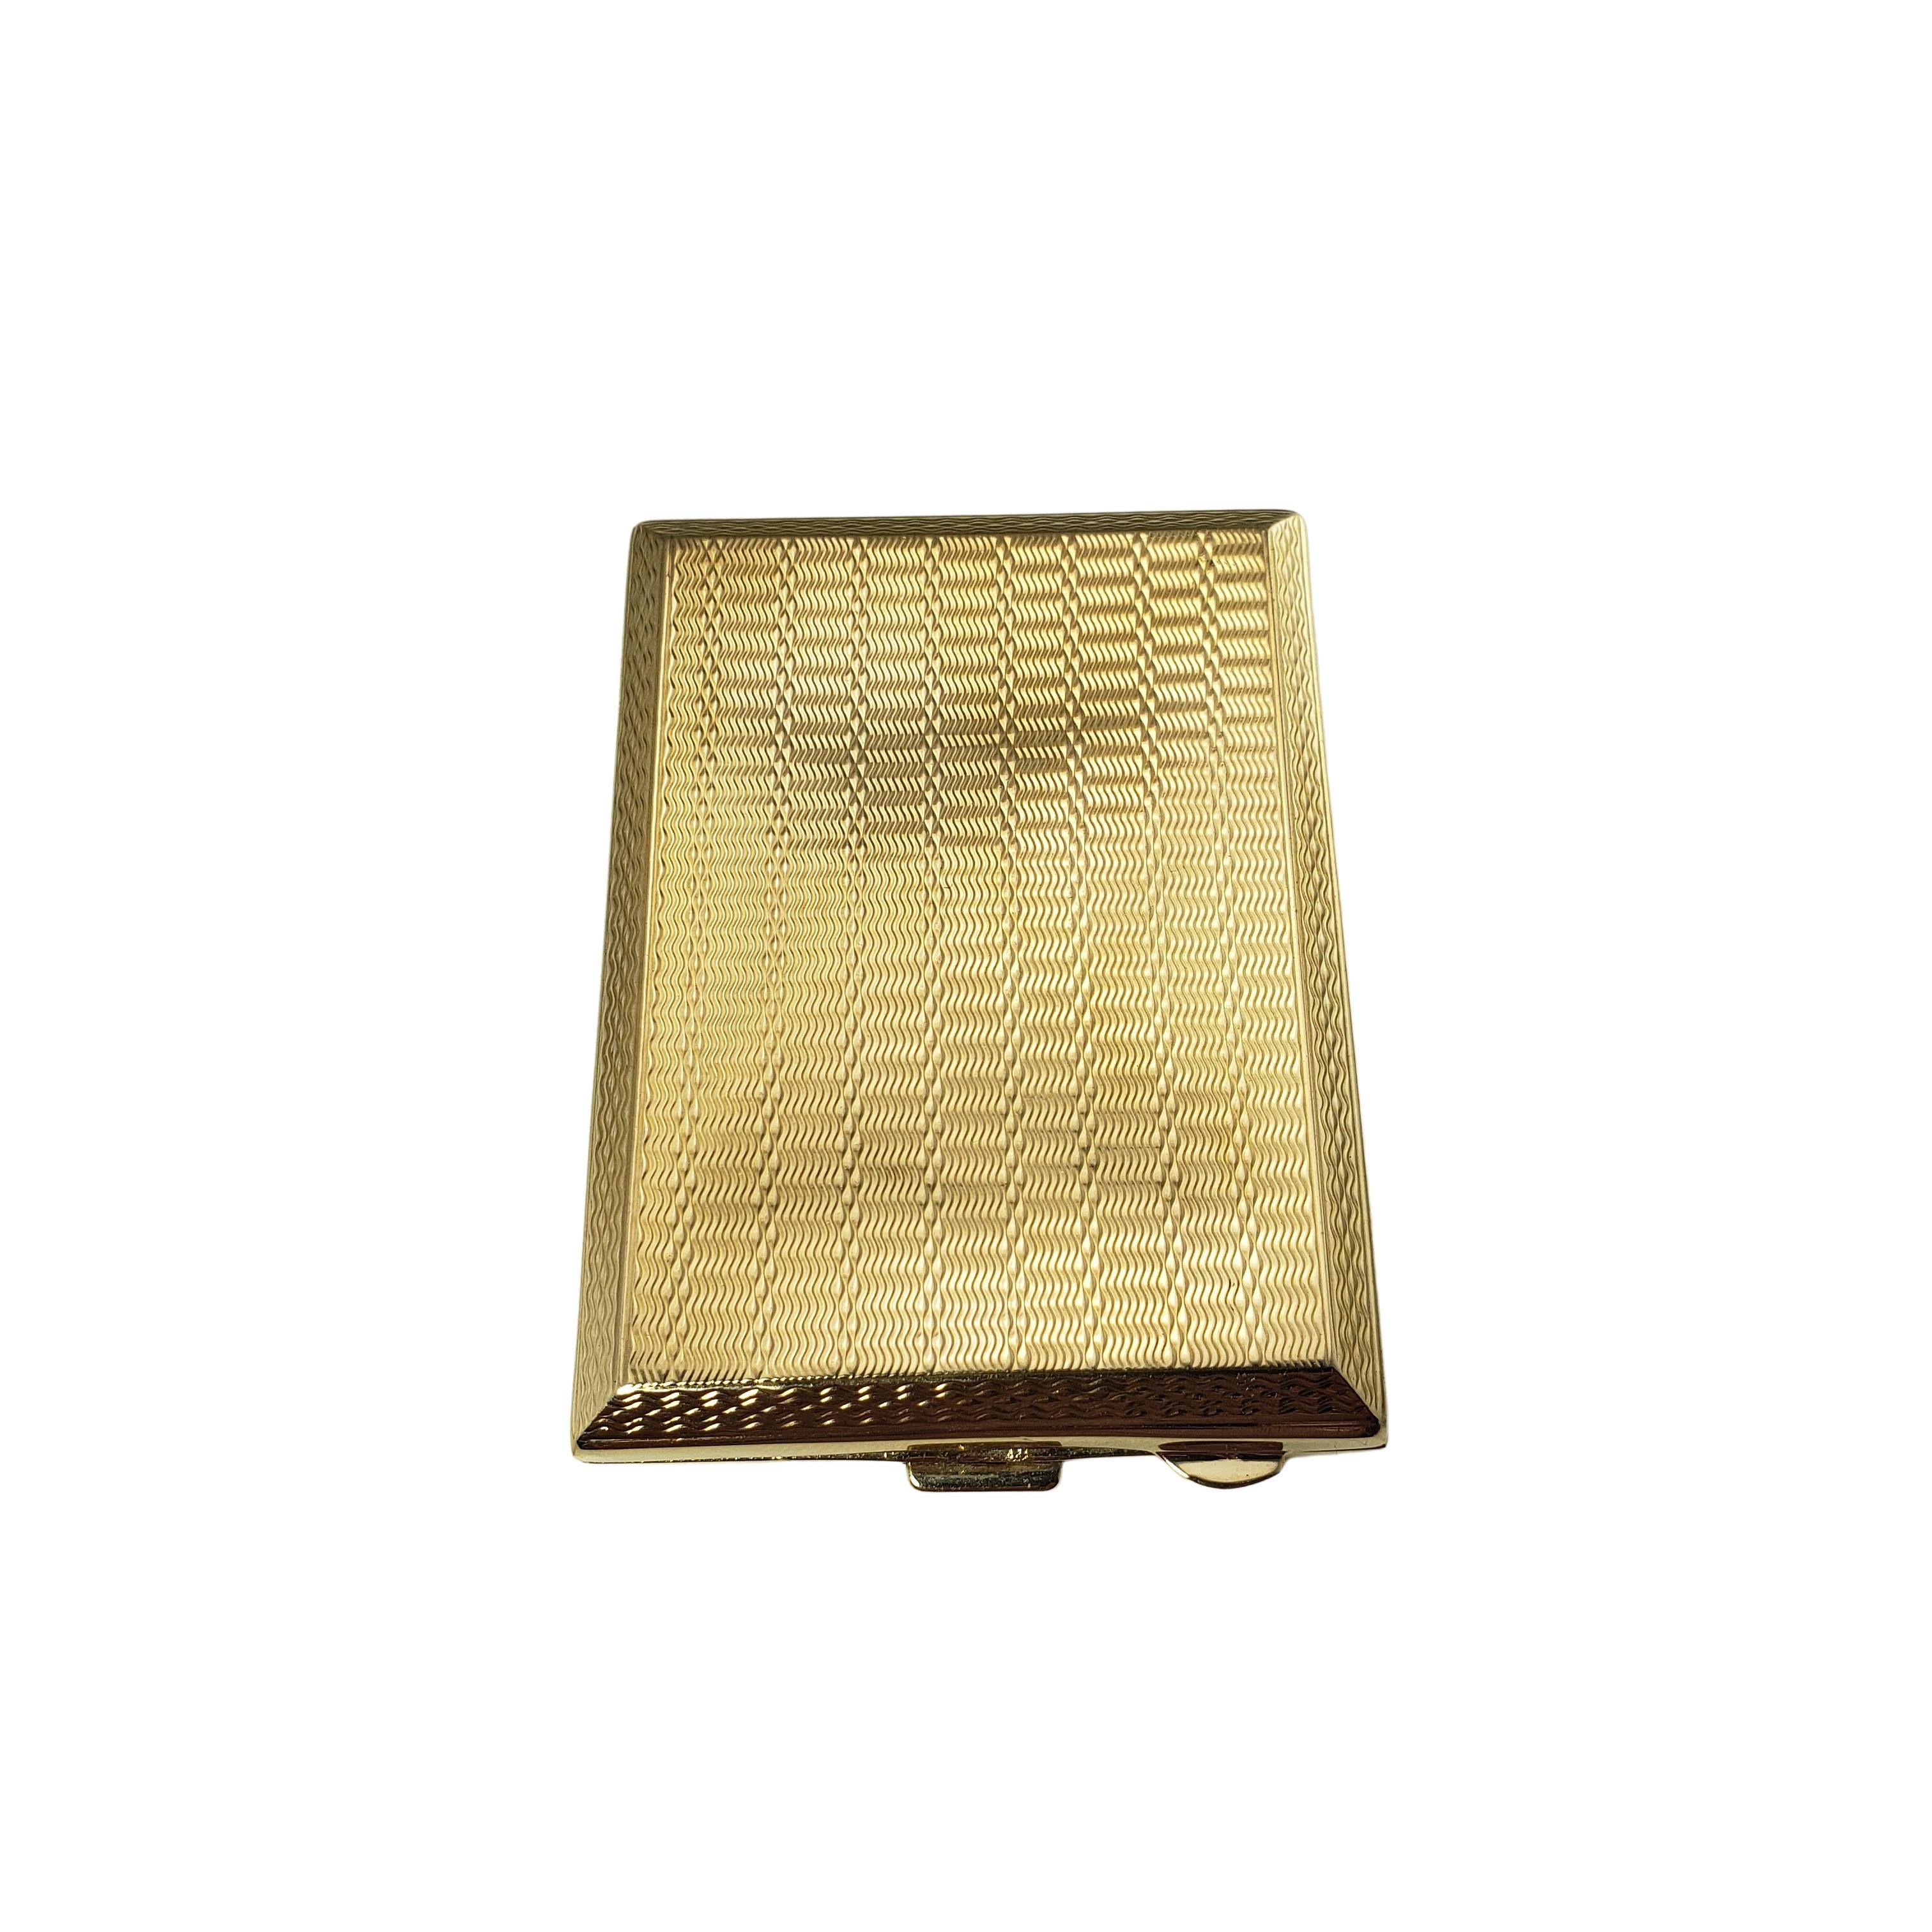 Vintage 9 Karat Yellow Gold Card Case-

This elegant hinged card case is crafted in beautifully detailed 9K yellow gold.

Size: 60 mm x 44 mm

Weight: 22.6 dwt. / 35.1 gr.

Stamped: 9.375 E

Very good condition, professionally polished.

Will come